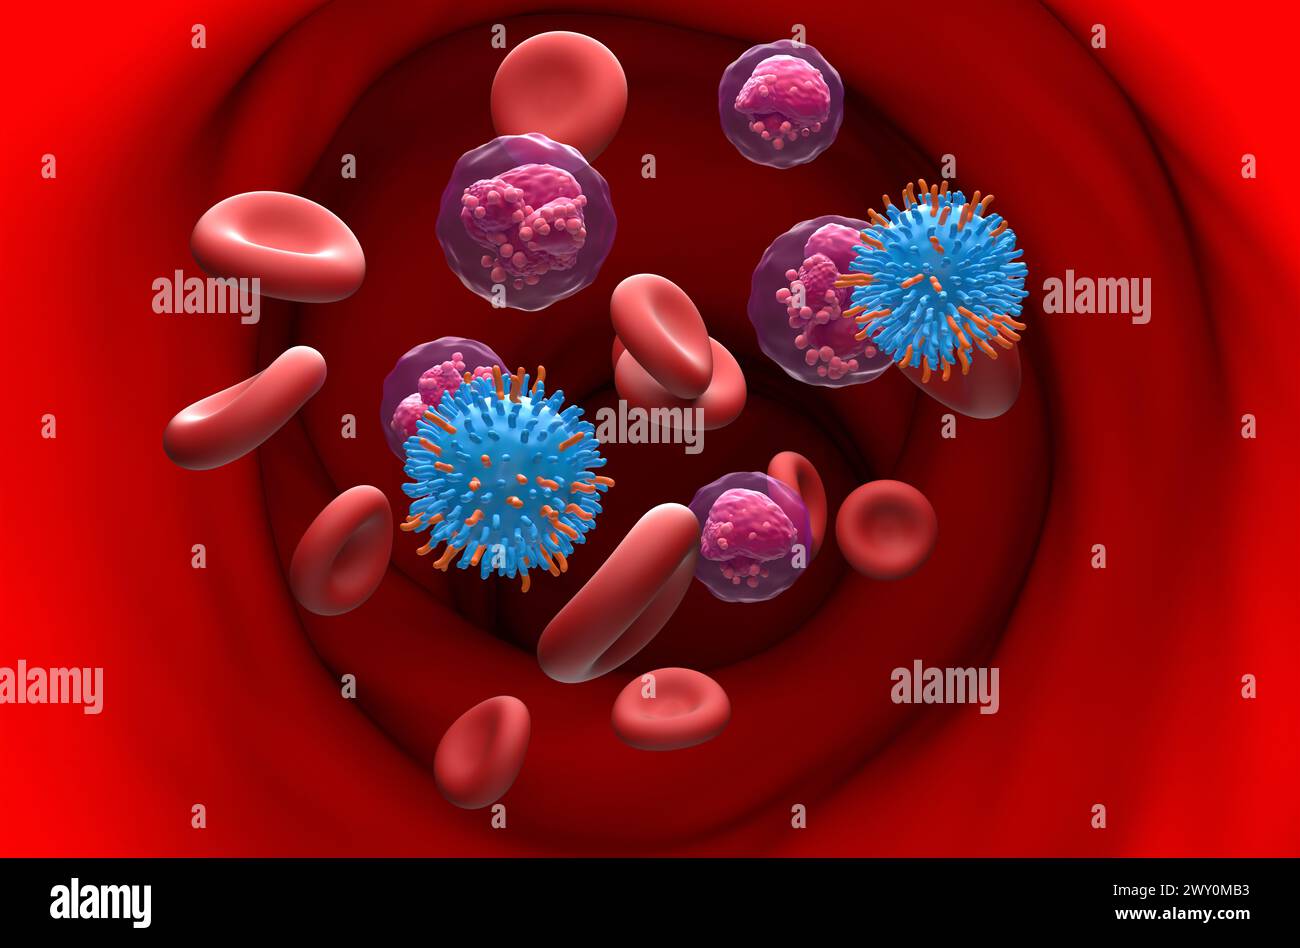 CAR T cell therapy in Acute Lymphocytic Leukemia (ALL) - section view 3d illustration Stock Photo